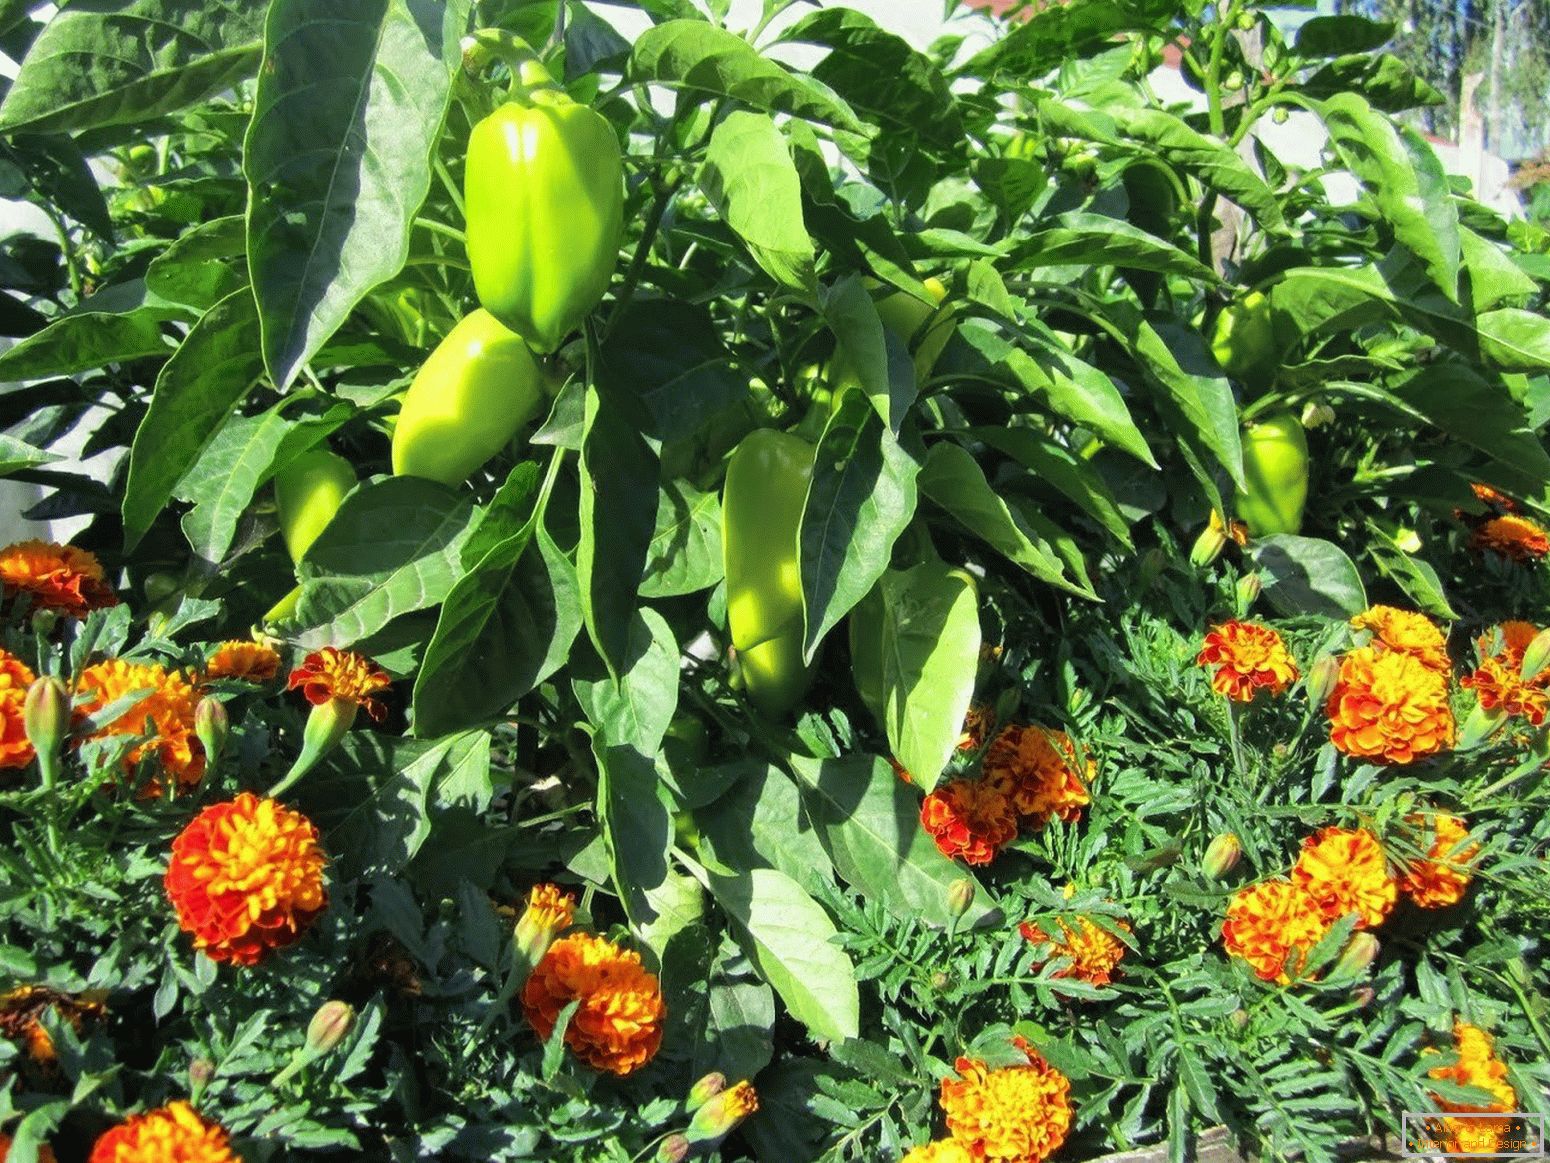 Flowers in a garden with pepper